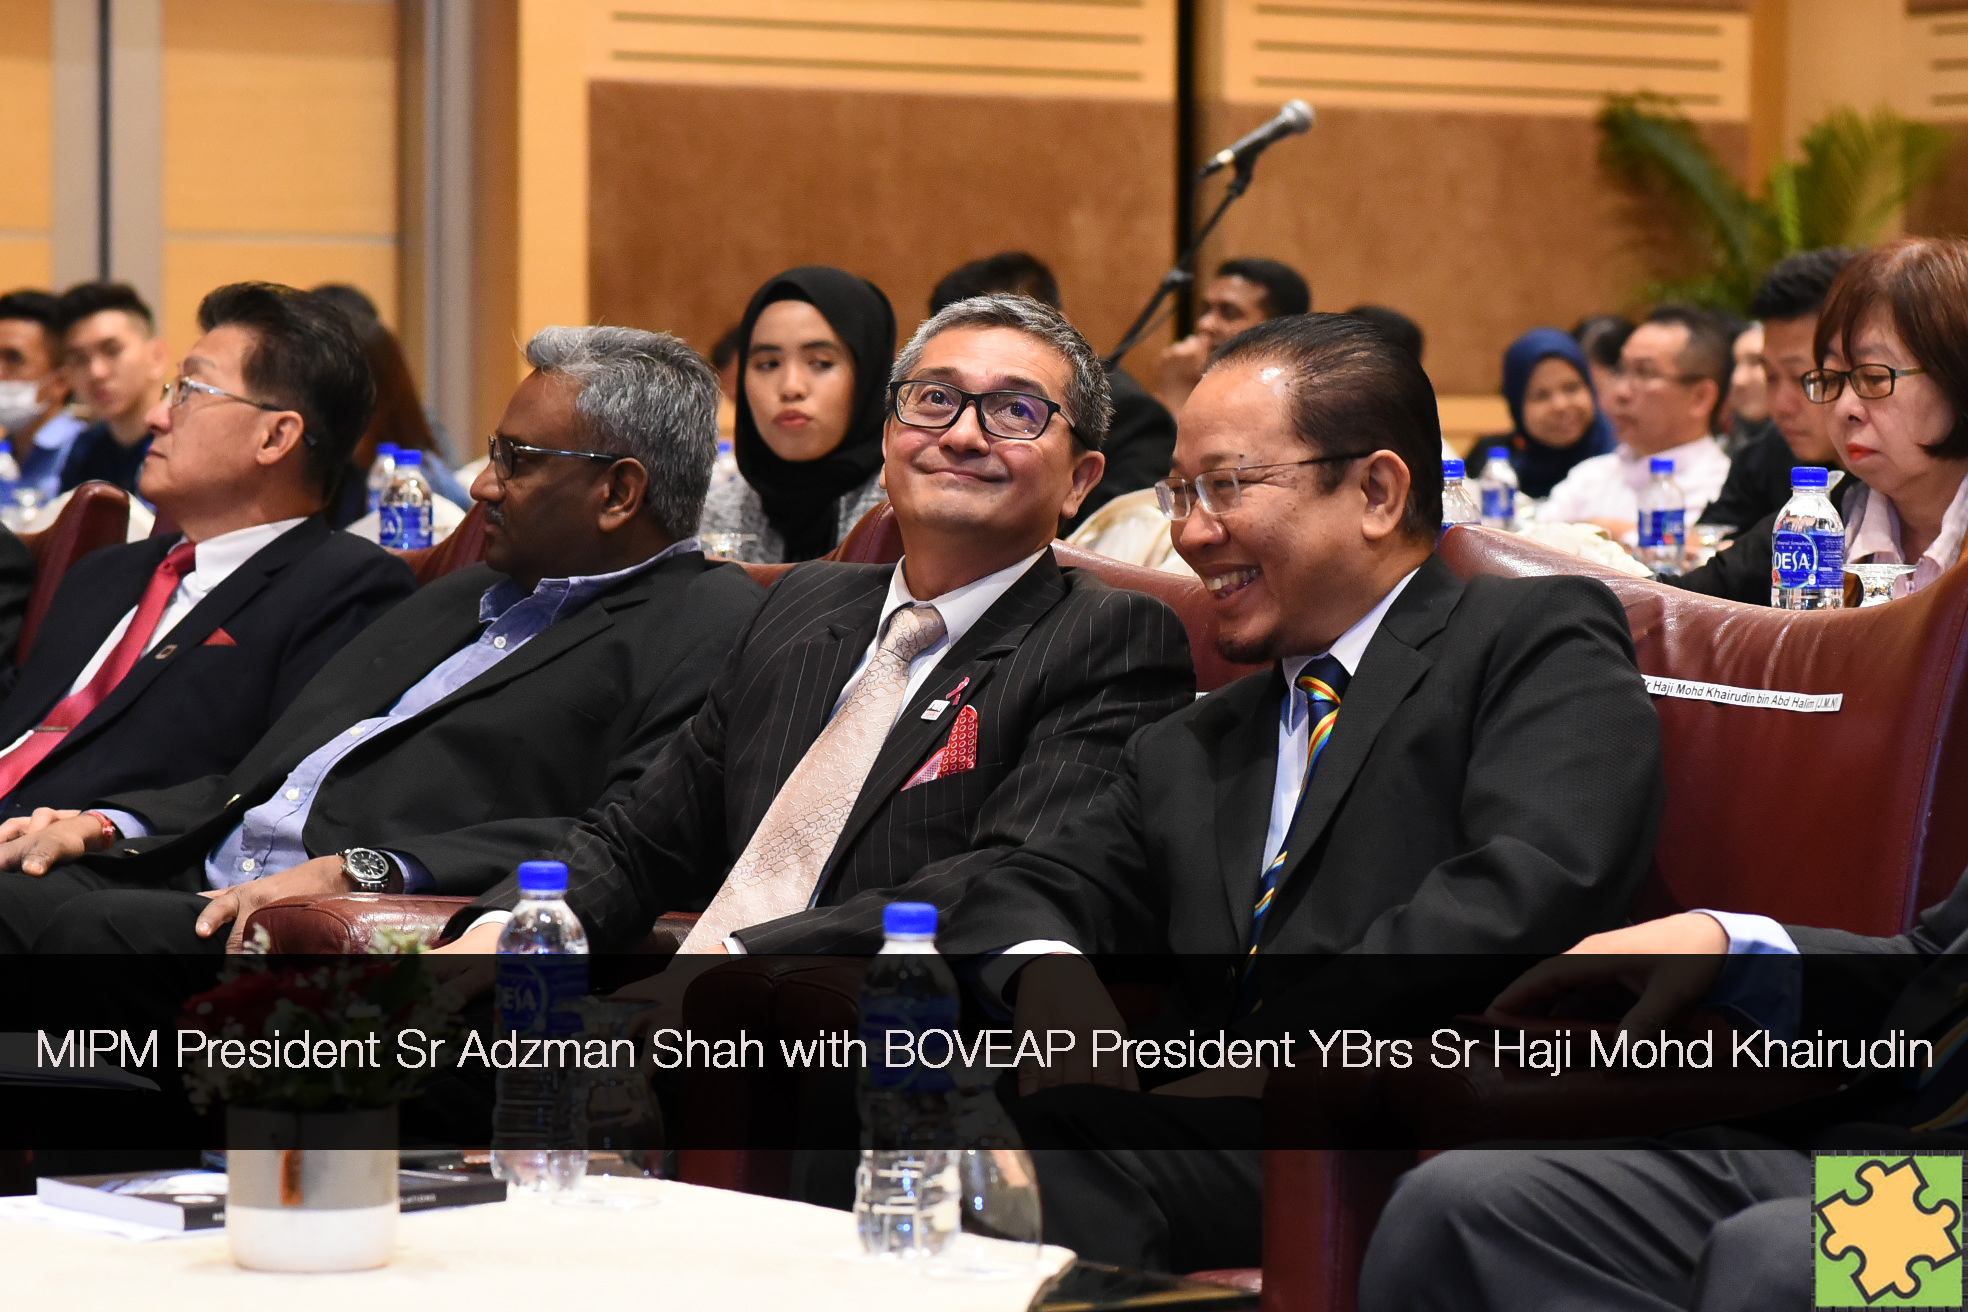 YBrs. Sr Haji Mohd Khairudin Bin Abd Halim, Director General of JPPH Malaysia has invited as Guest Of Honor and Key Note Speaker at MIPFM Conference 2019